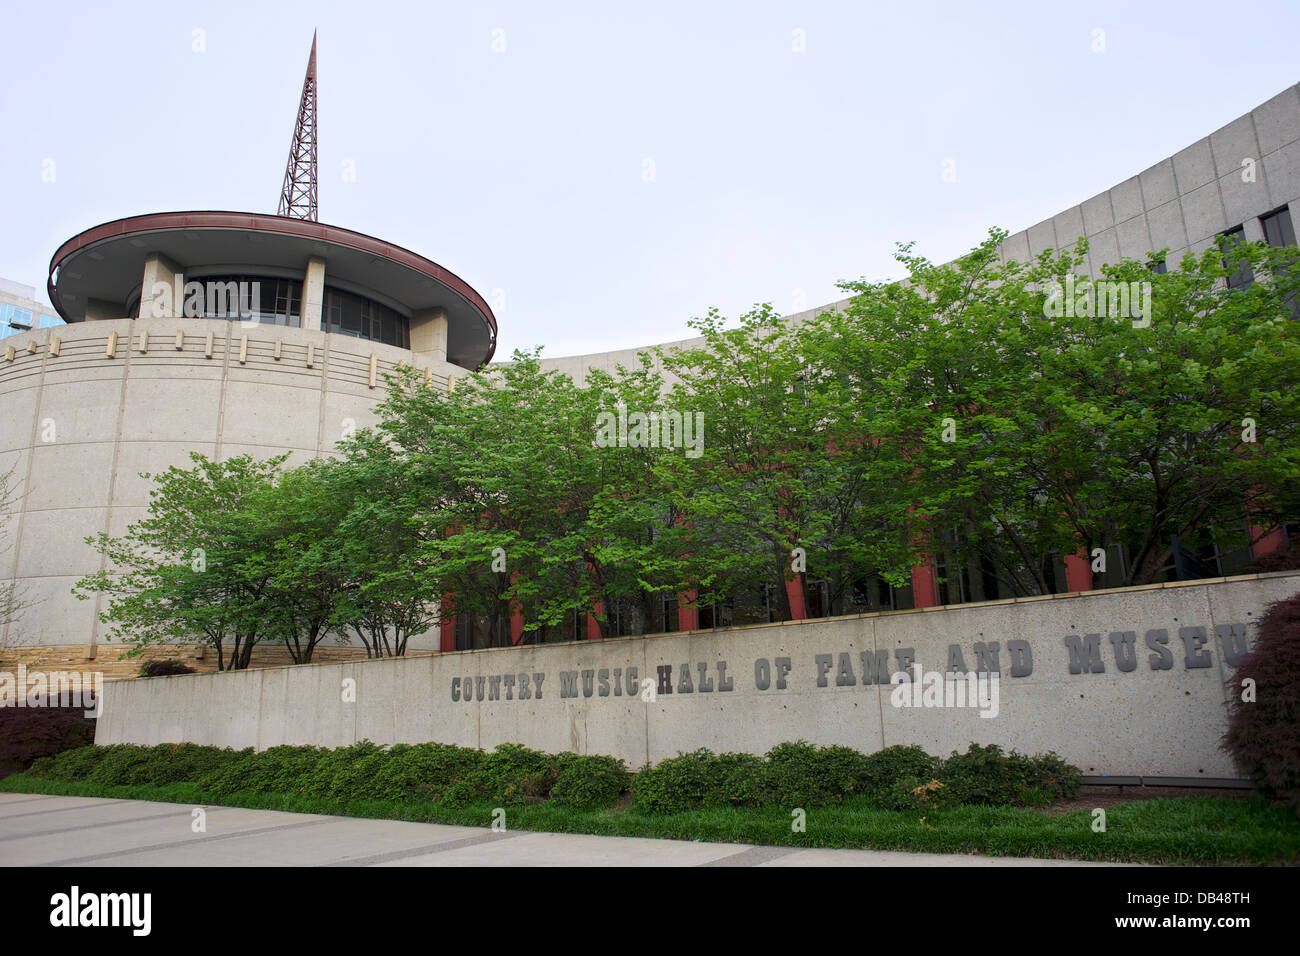 Country Music Hall of Fame and Museum, Nashville TN Stock Photo